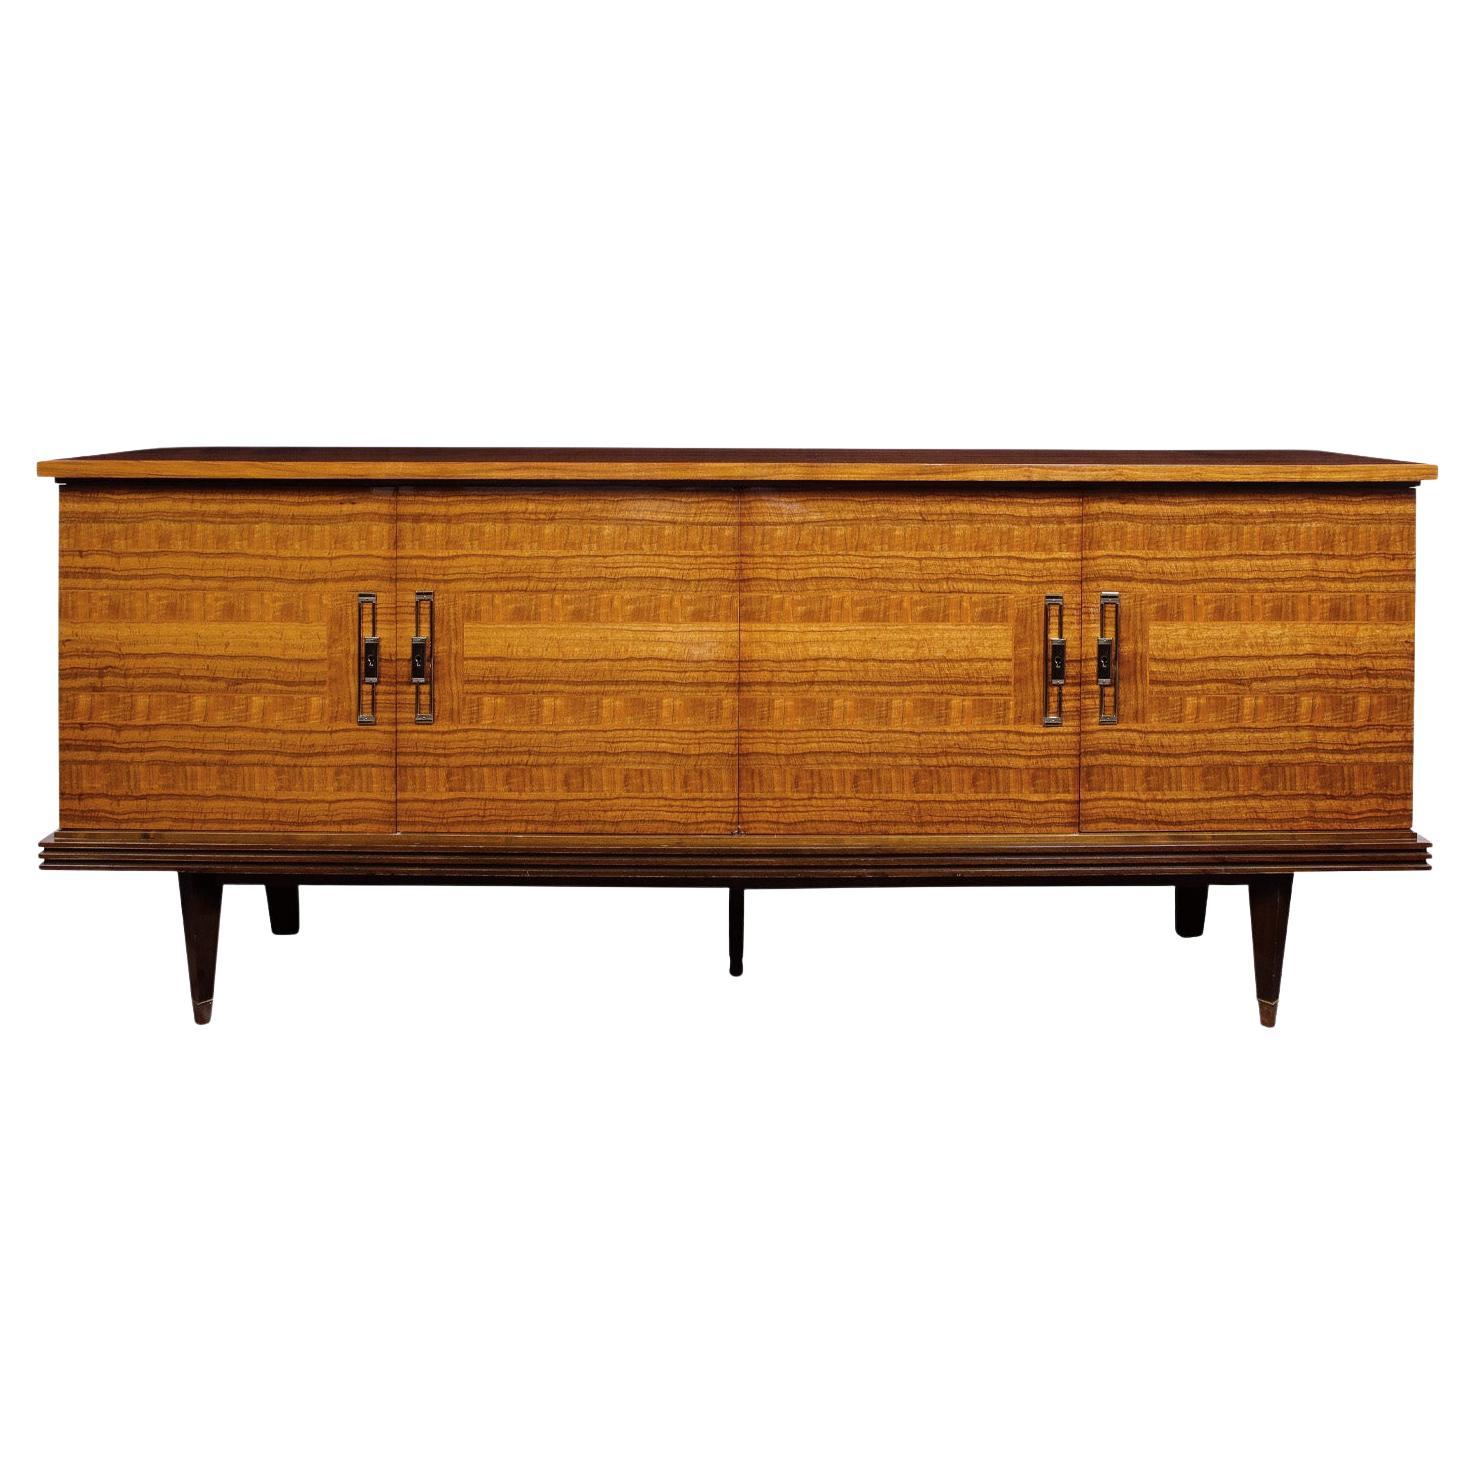 Remarkable French 4 Door Credenza with Marquetry and Inlays 1950s 'Signed'